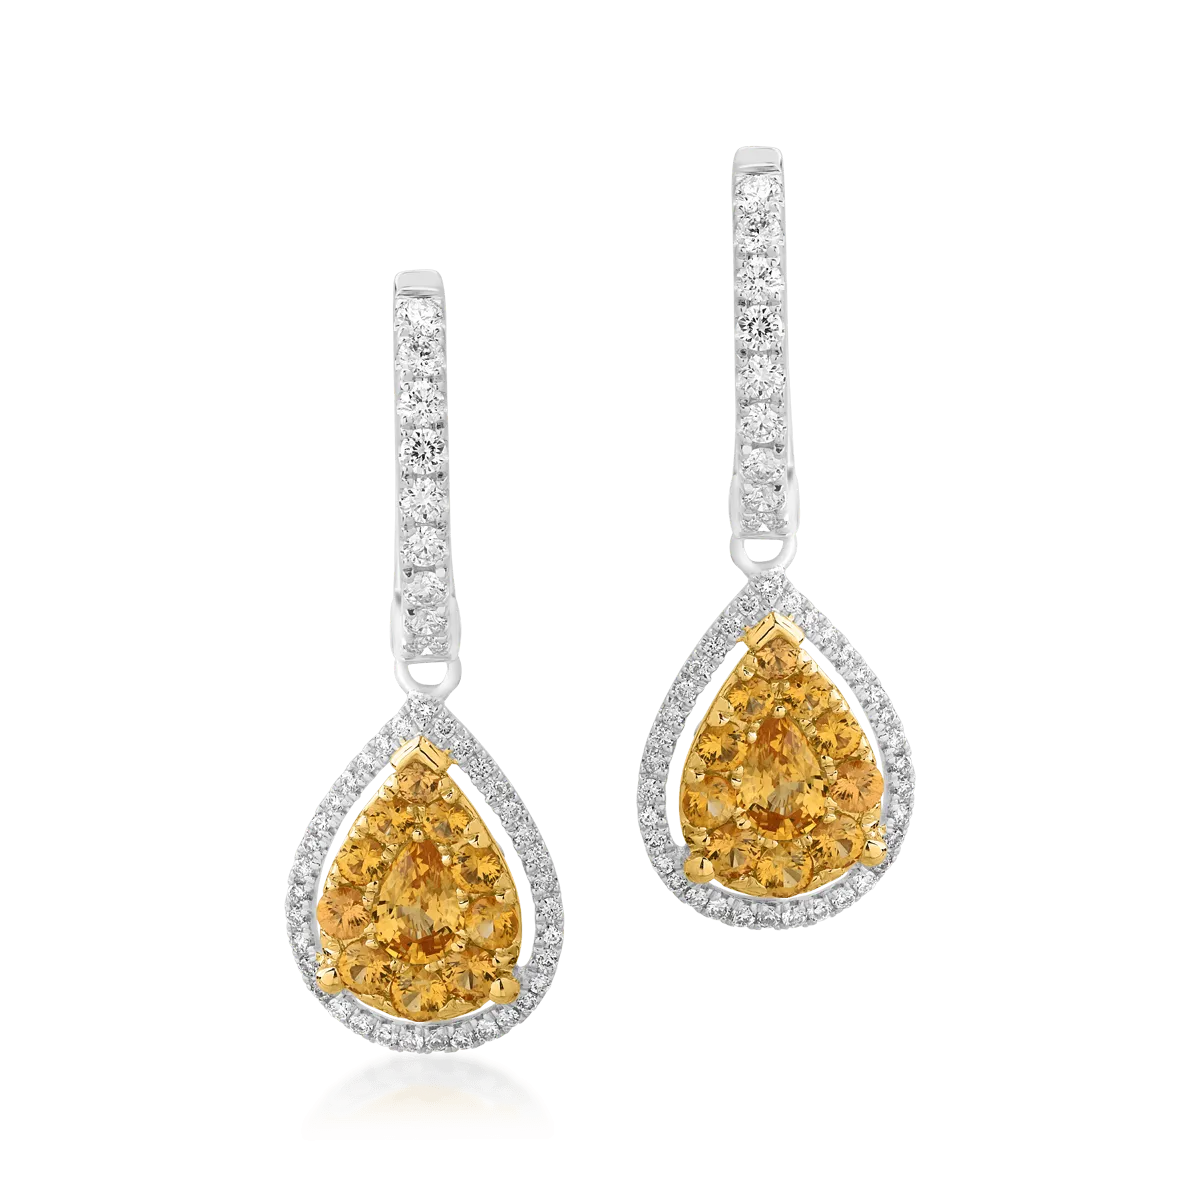 18K white/yellow gold earrings with 1.04ct yellow sapphires and 0.41ct diamonds